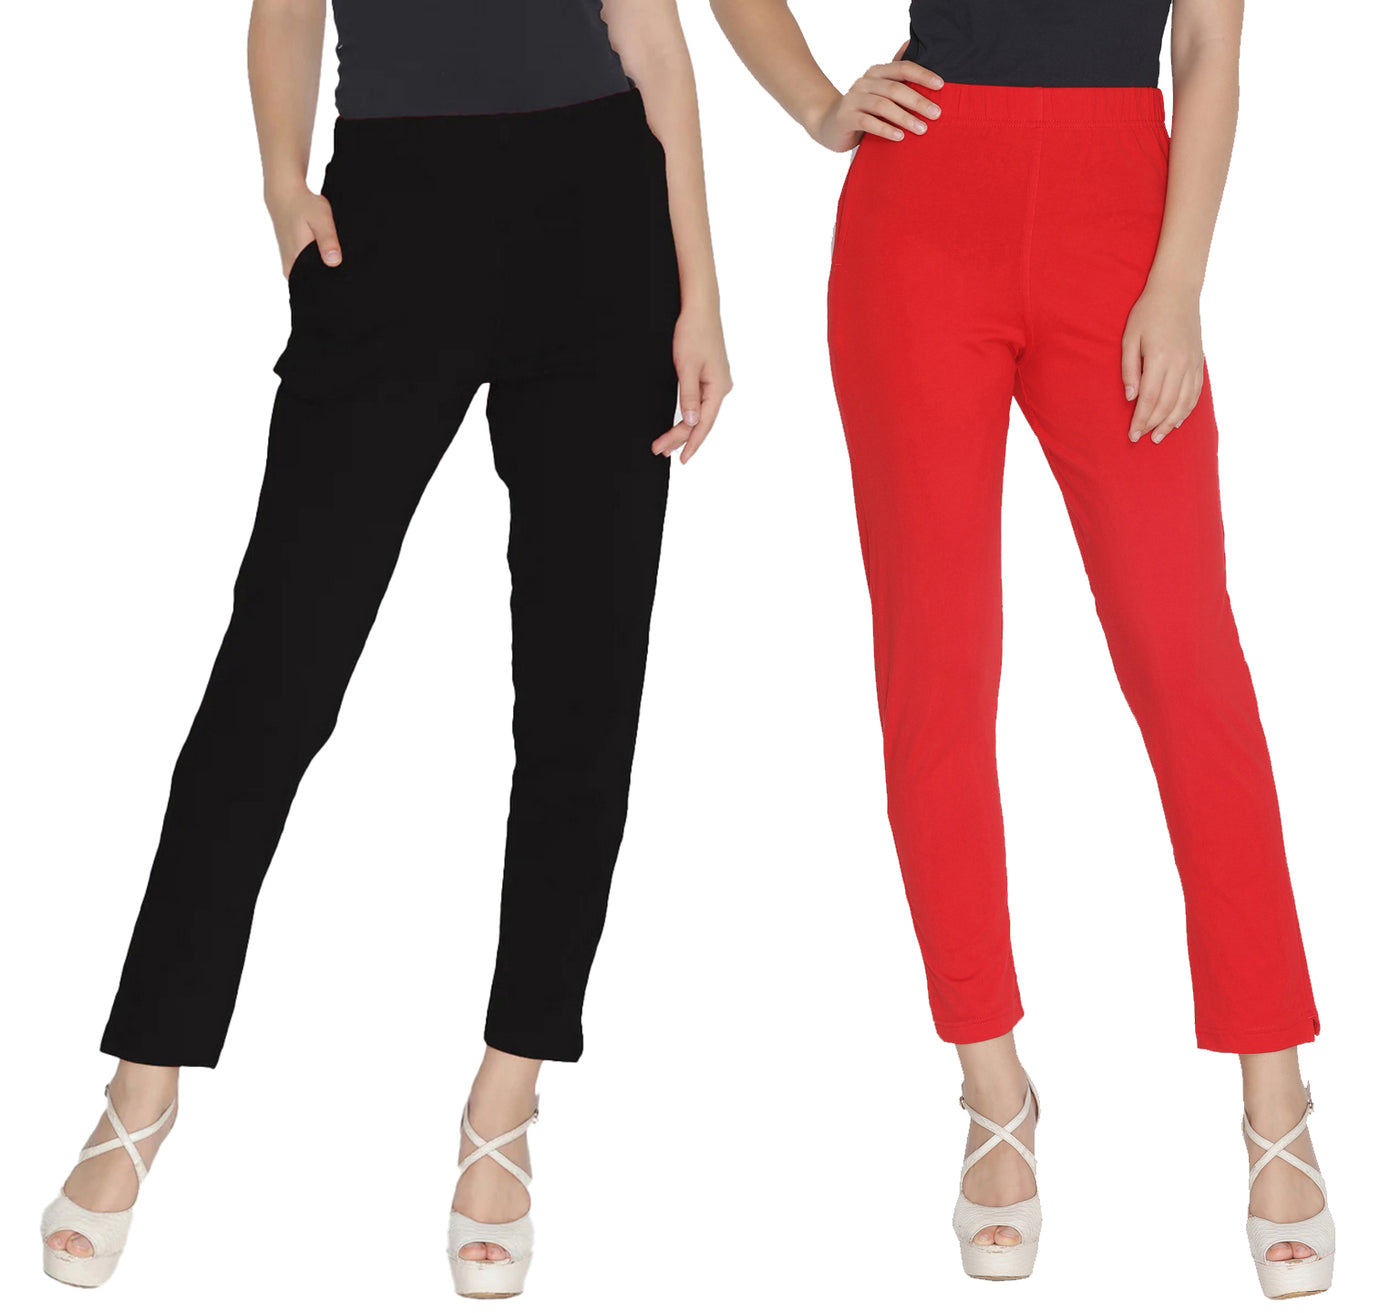 Black and Red Kutri Pant Combo Pack